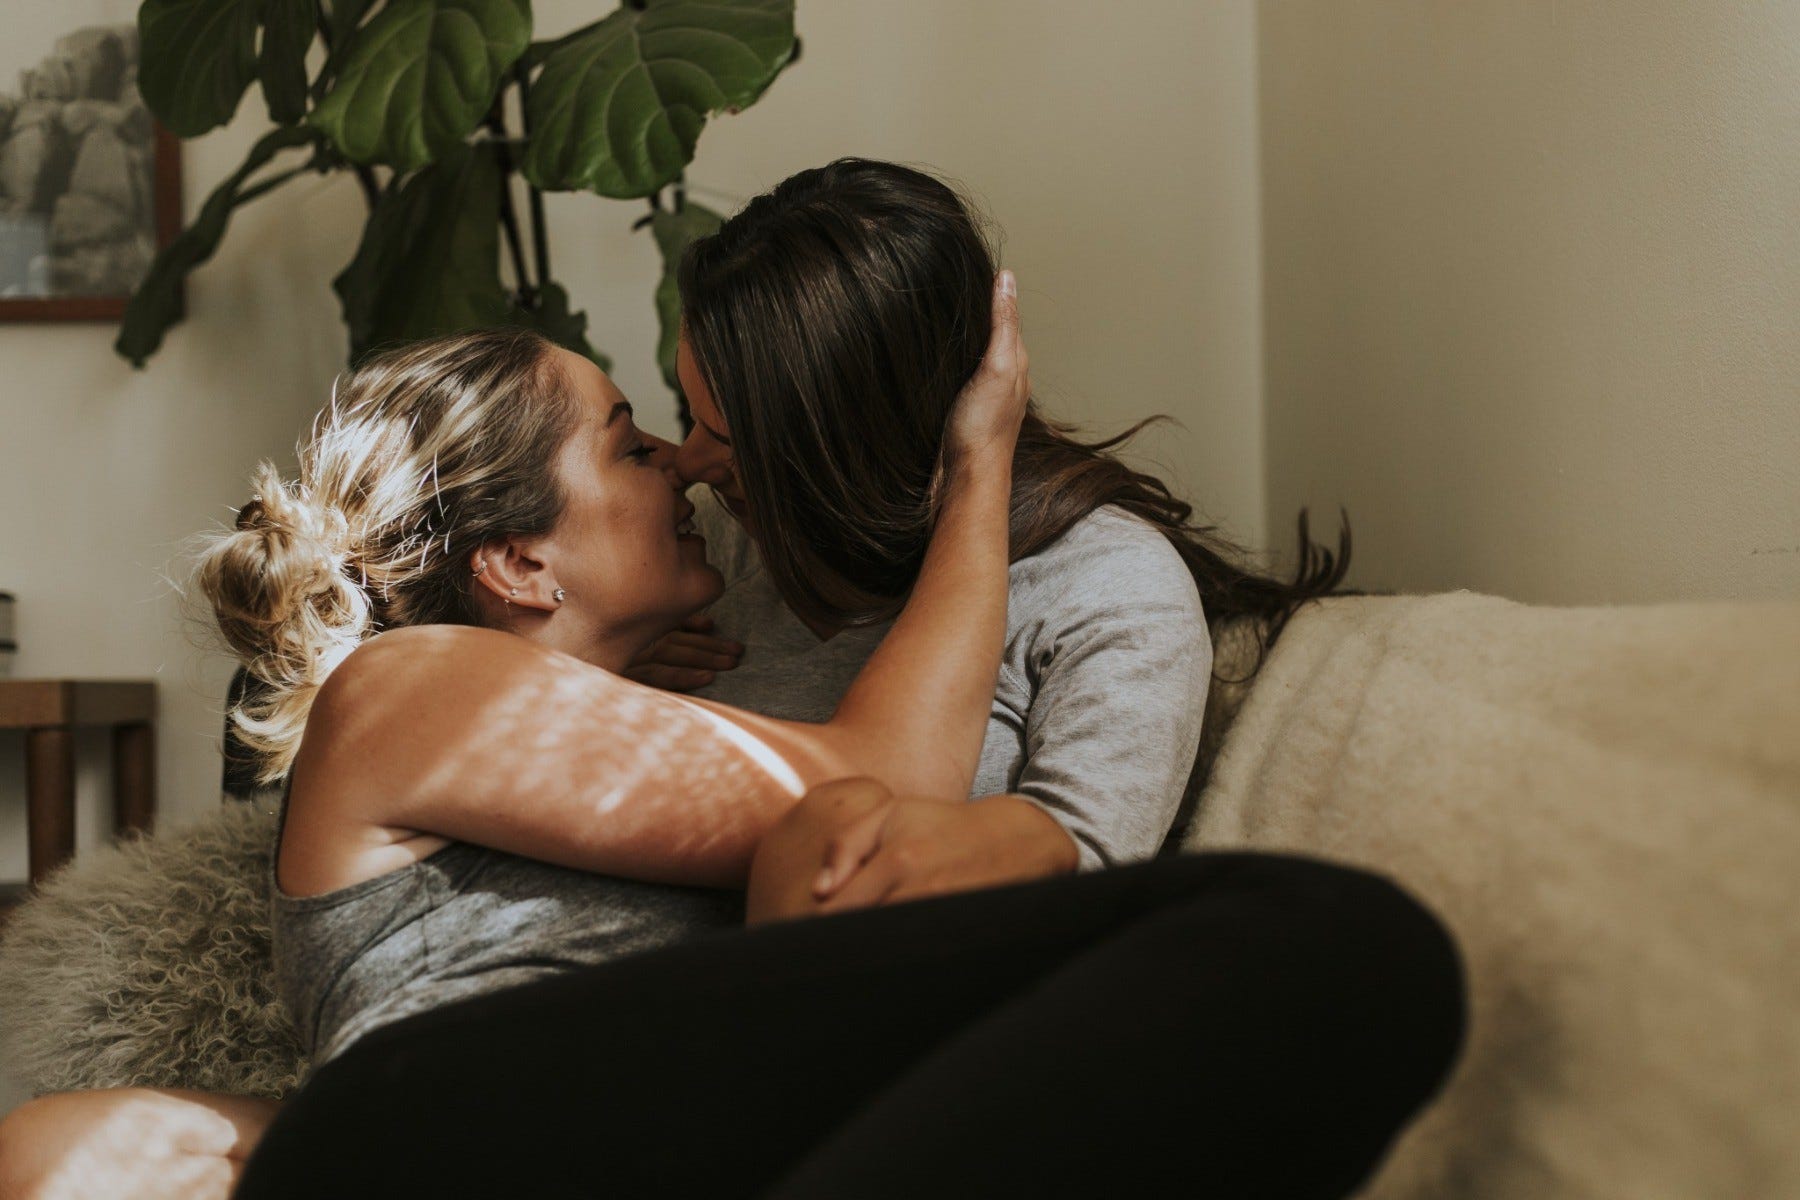 Girlfriends smiling and kissing on a couch